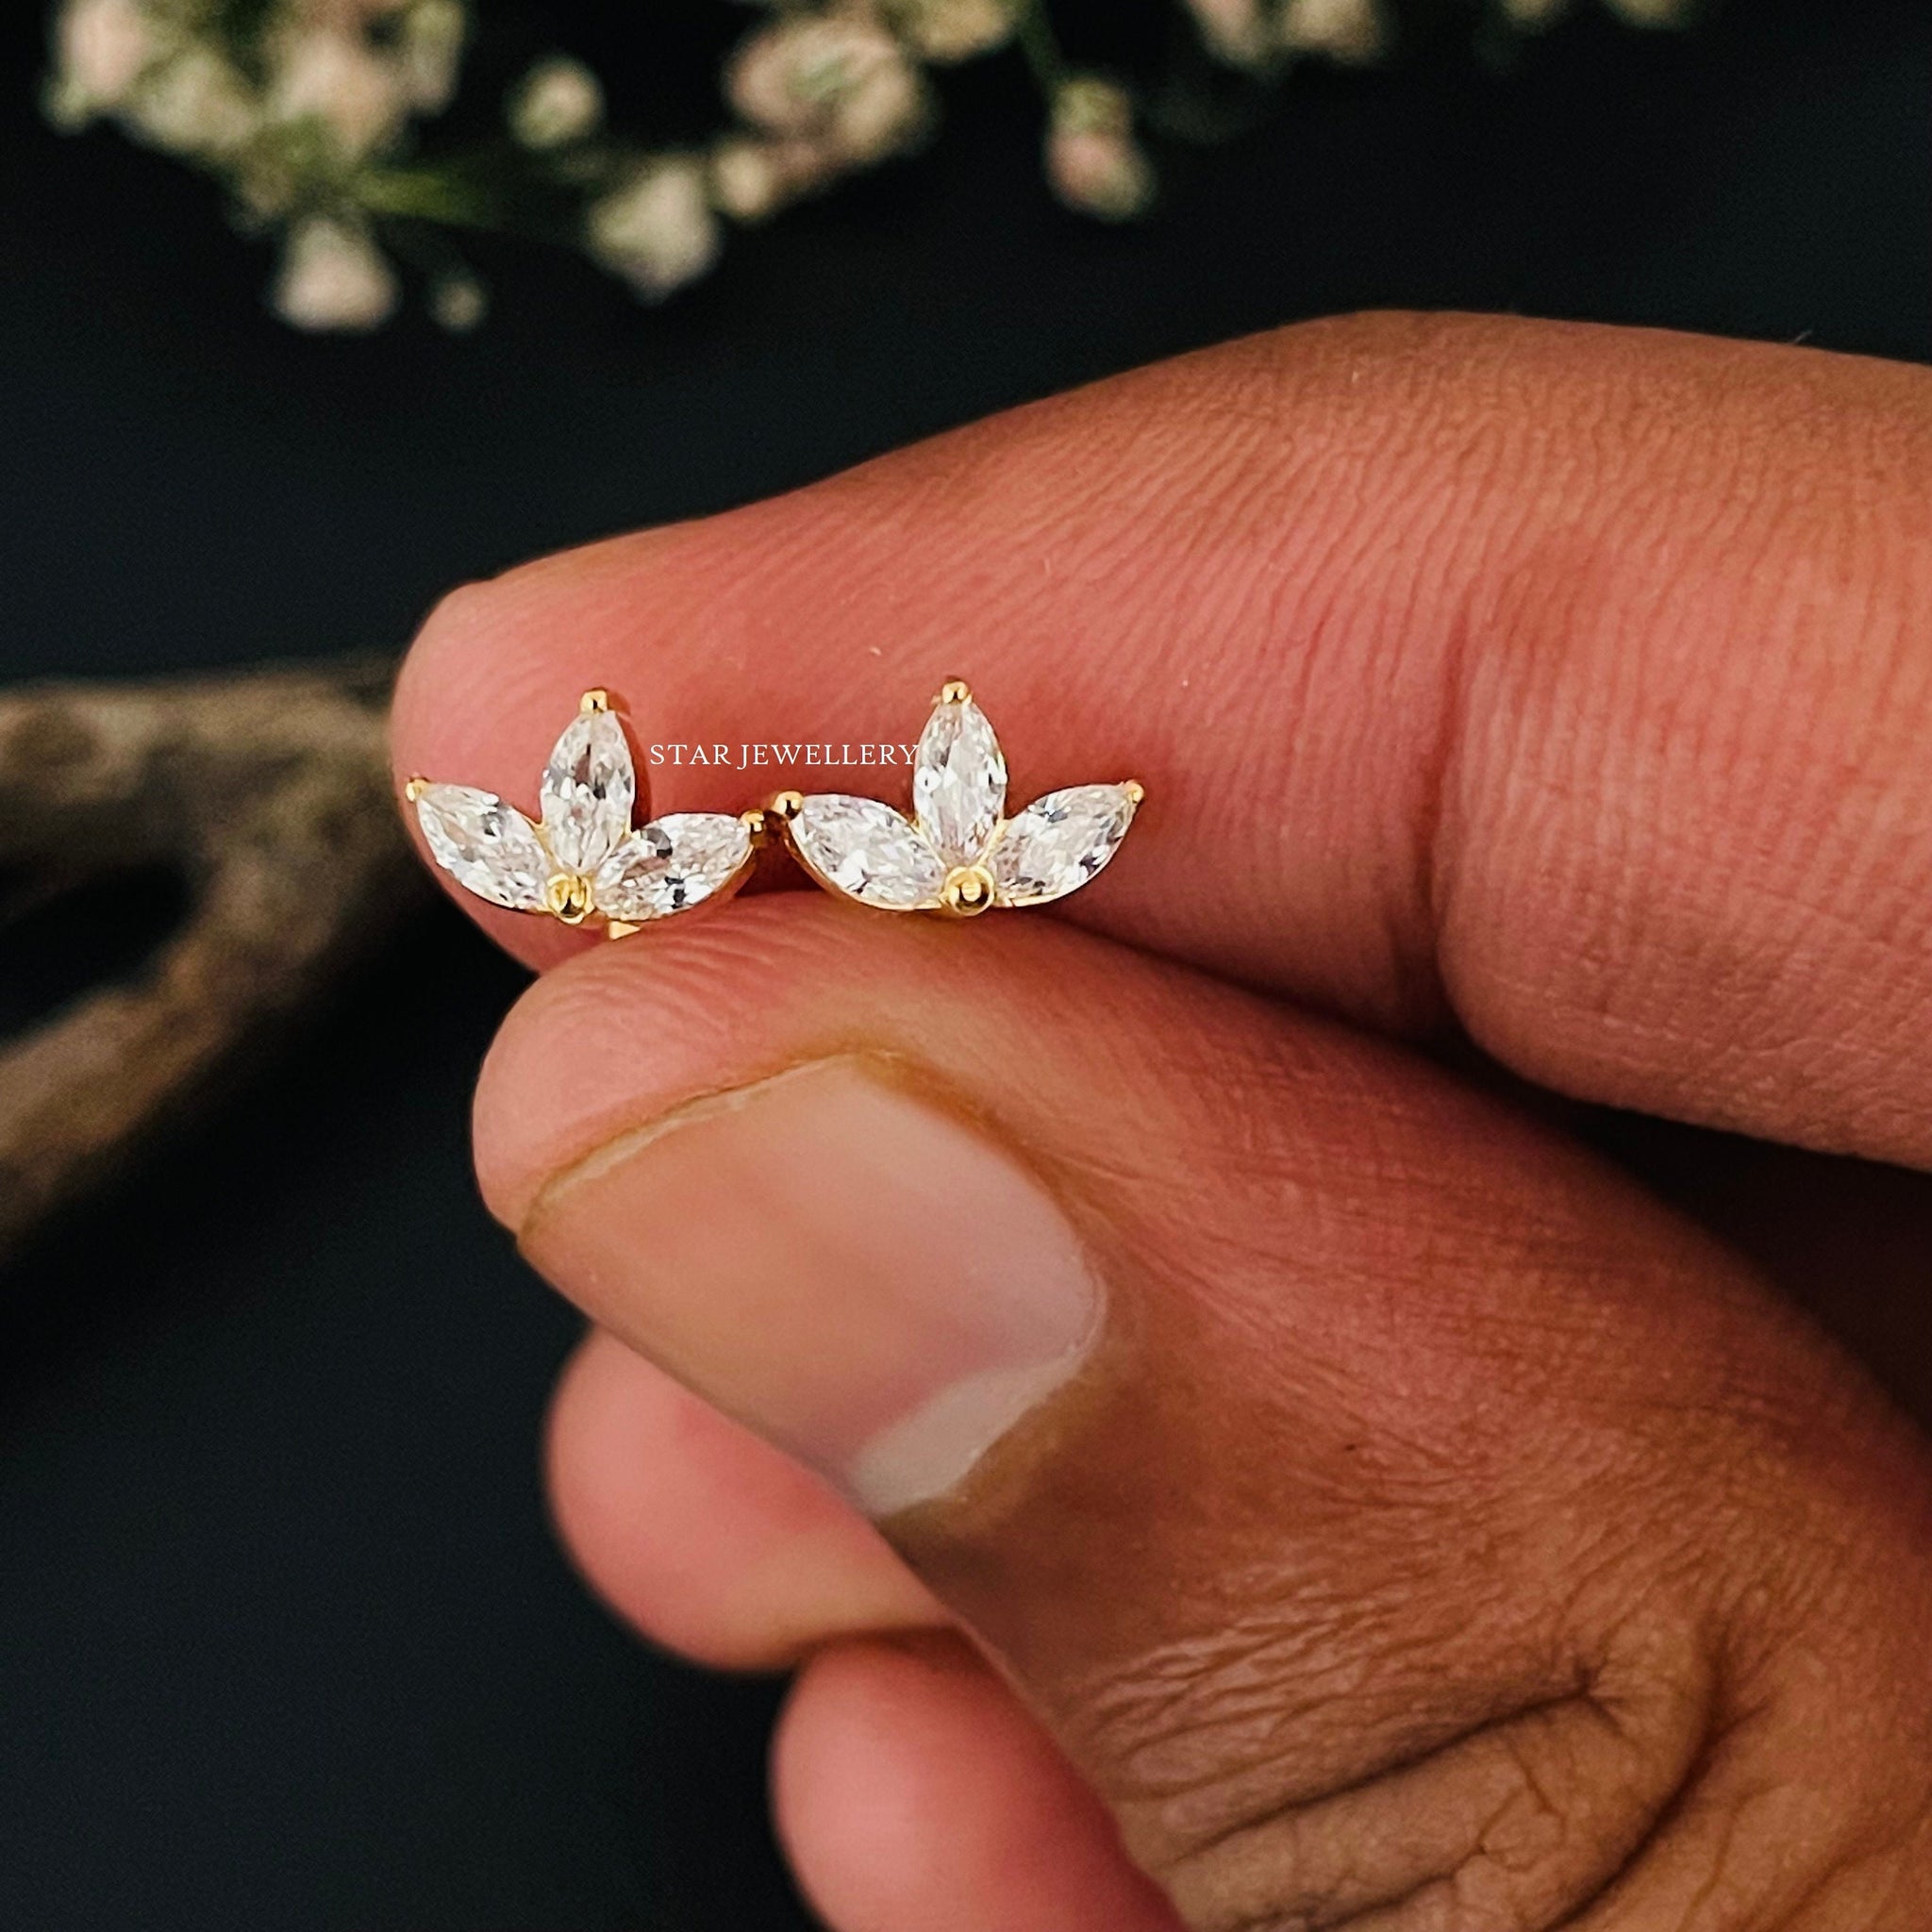 14K Solid Gold Leaf Stud Diamond Piercing, Tiny Leaf Lotus Piercing for Earlobe, Tragus, Helix &amp; Conch, Leaf Piercing with Natural Diamonds